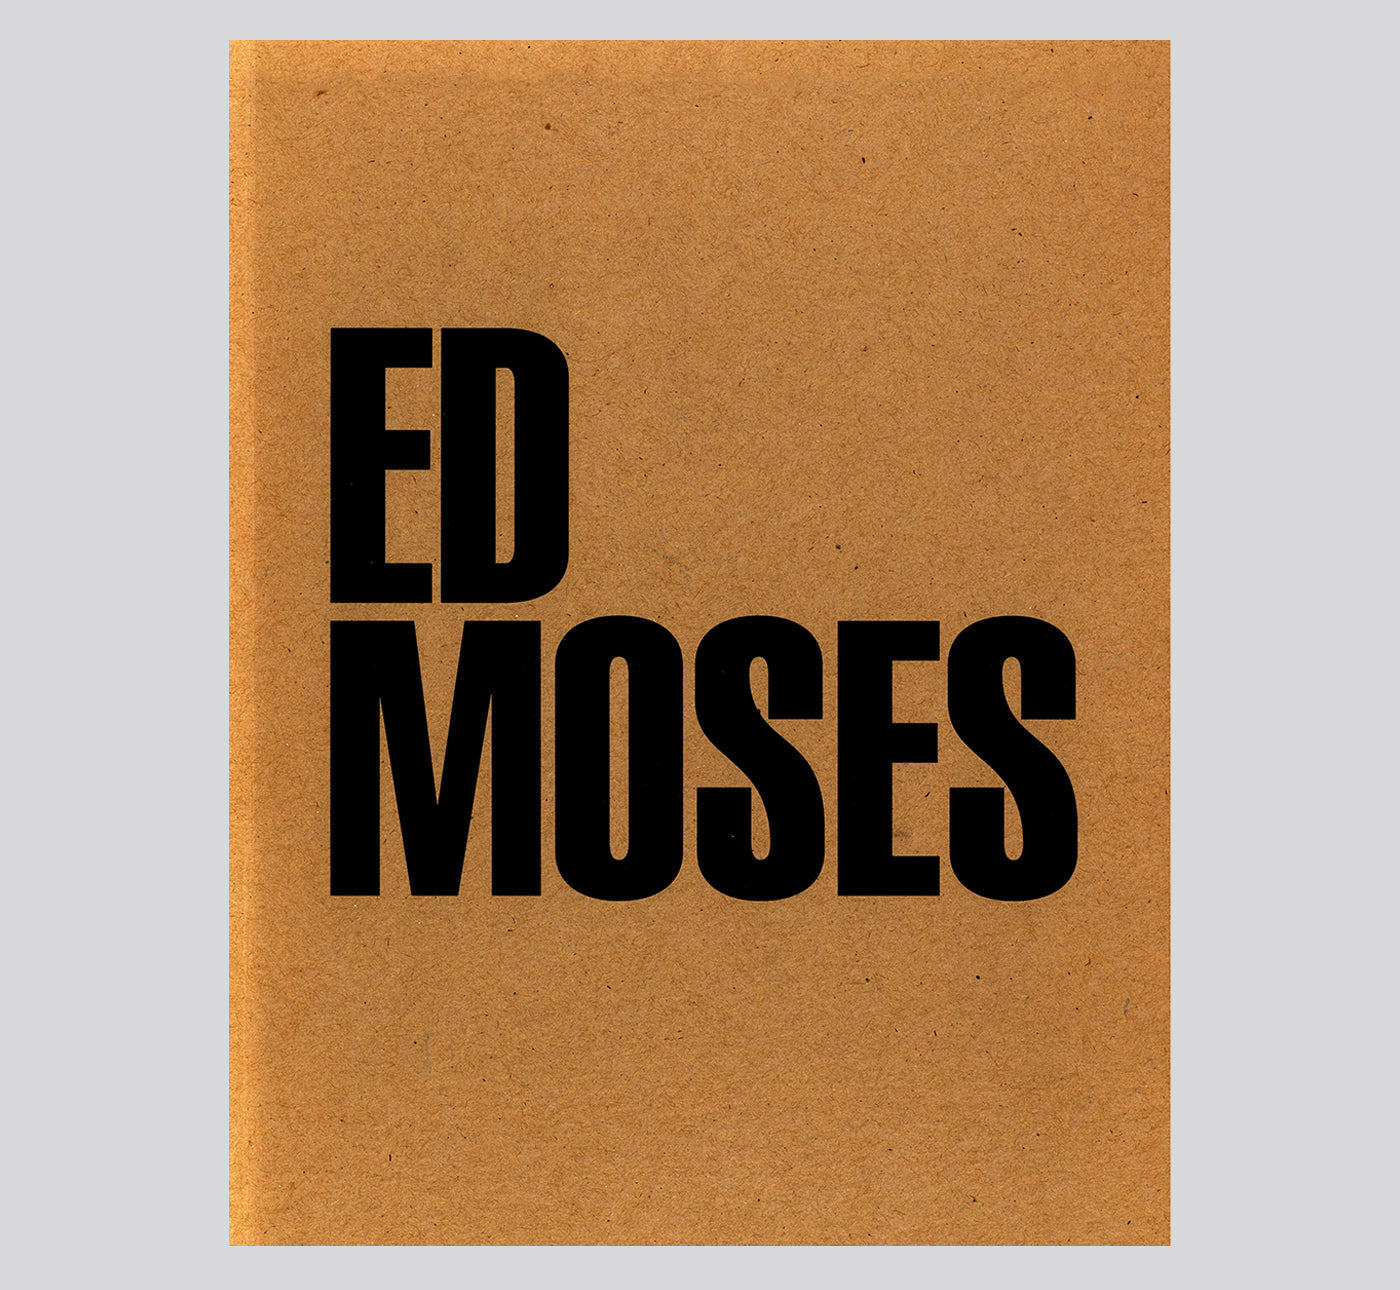 Ed Moses: Abstraction & Apparition